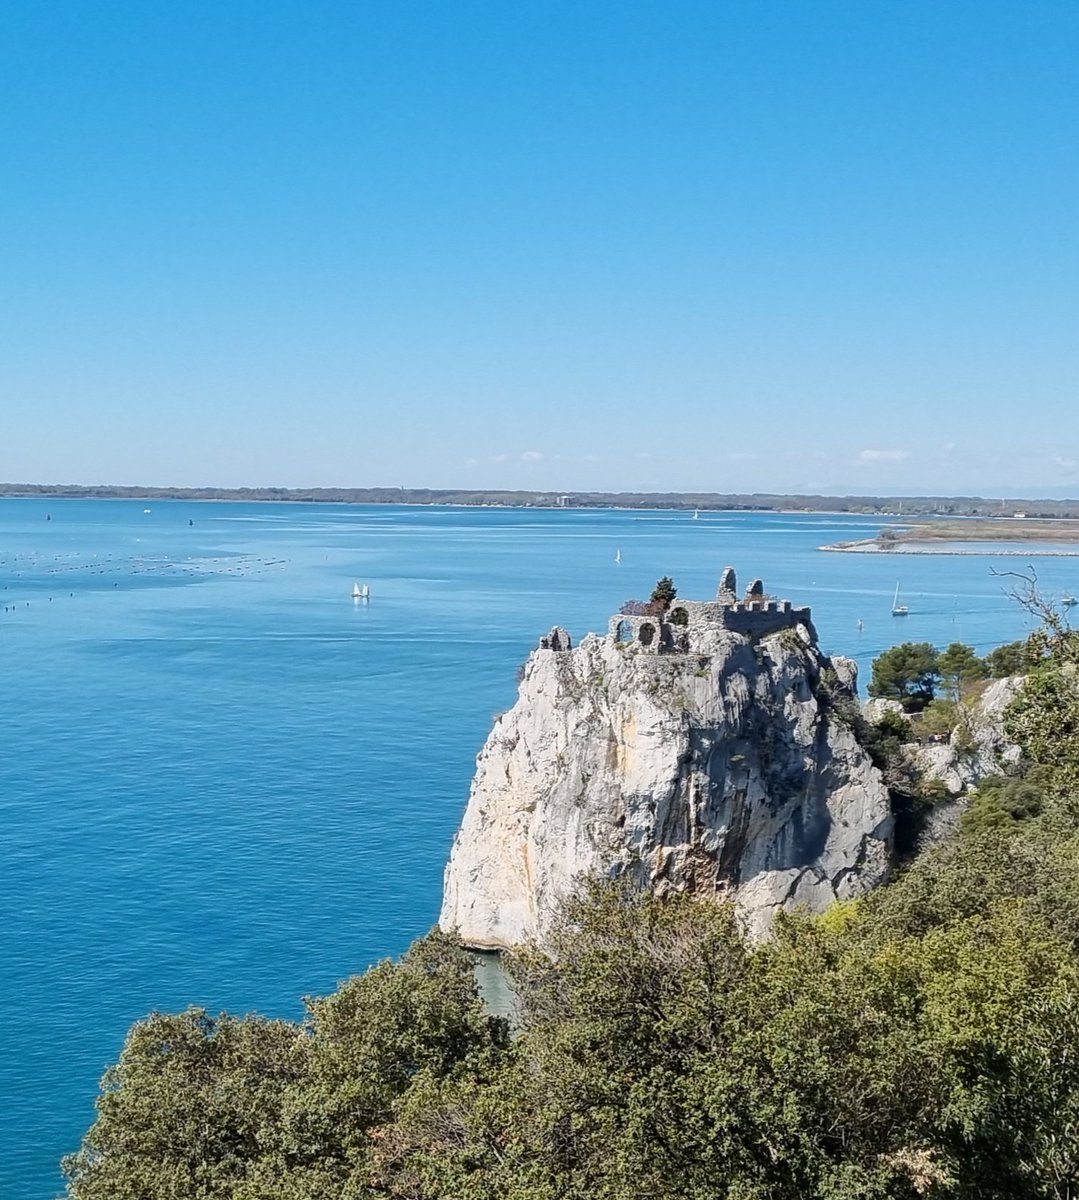 The #eleventhcentury #castle of Duino #medieval #Italian #architecture